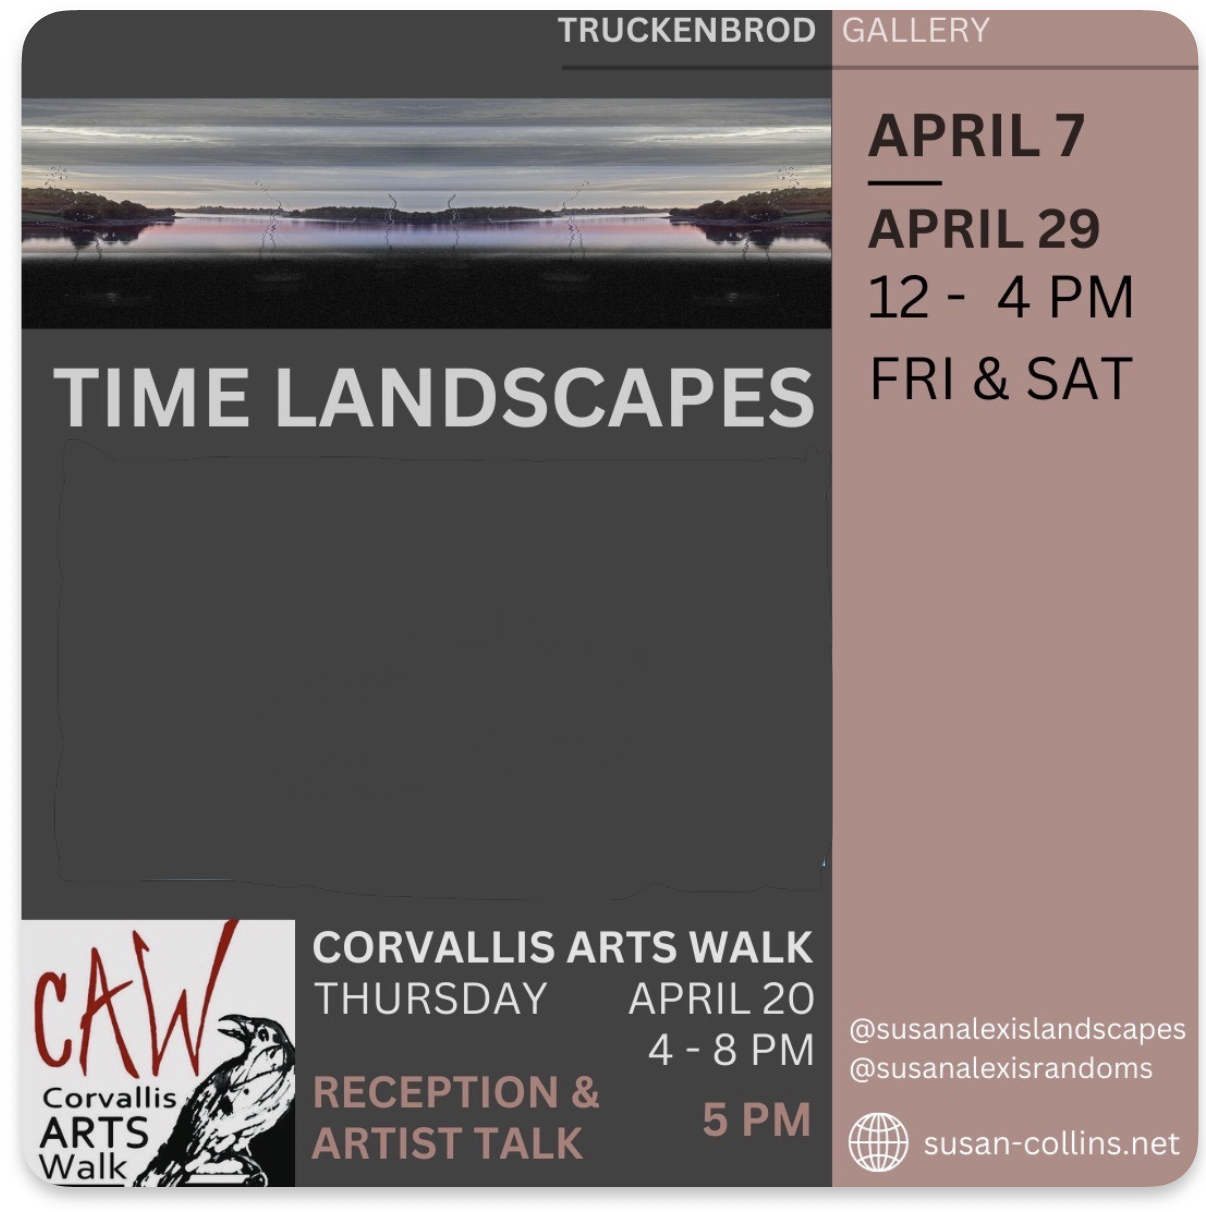 Exhibition poster for Time Landscapes, Truckenbrod Gallery